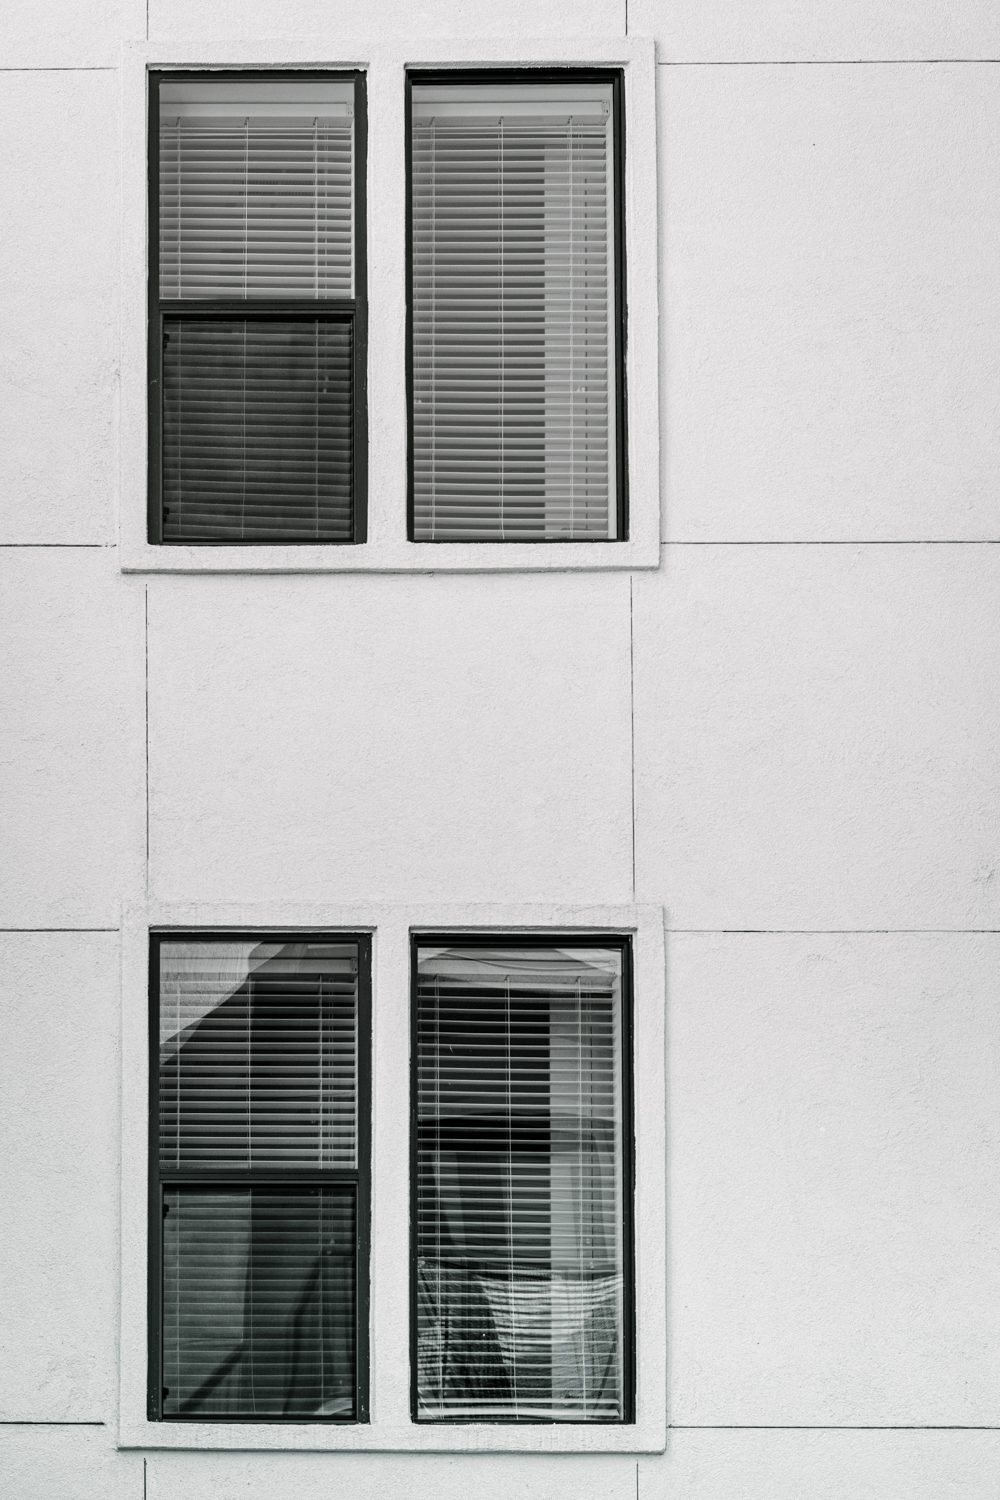 Black and white photo of windows on the side of a building.